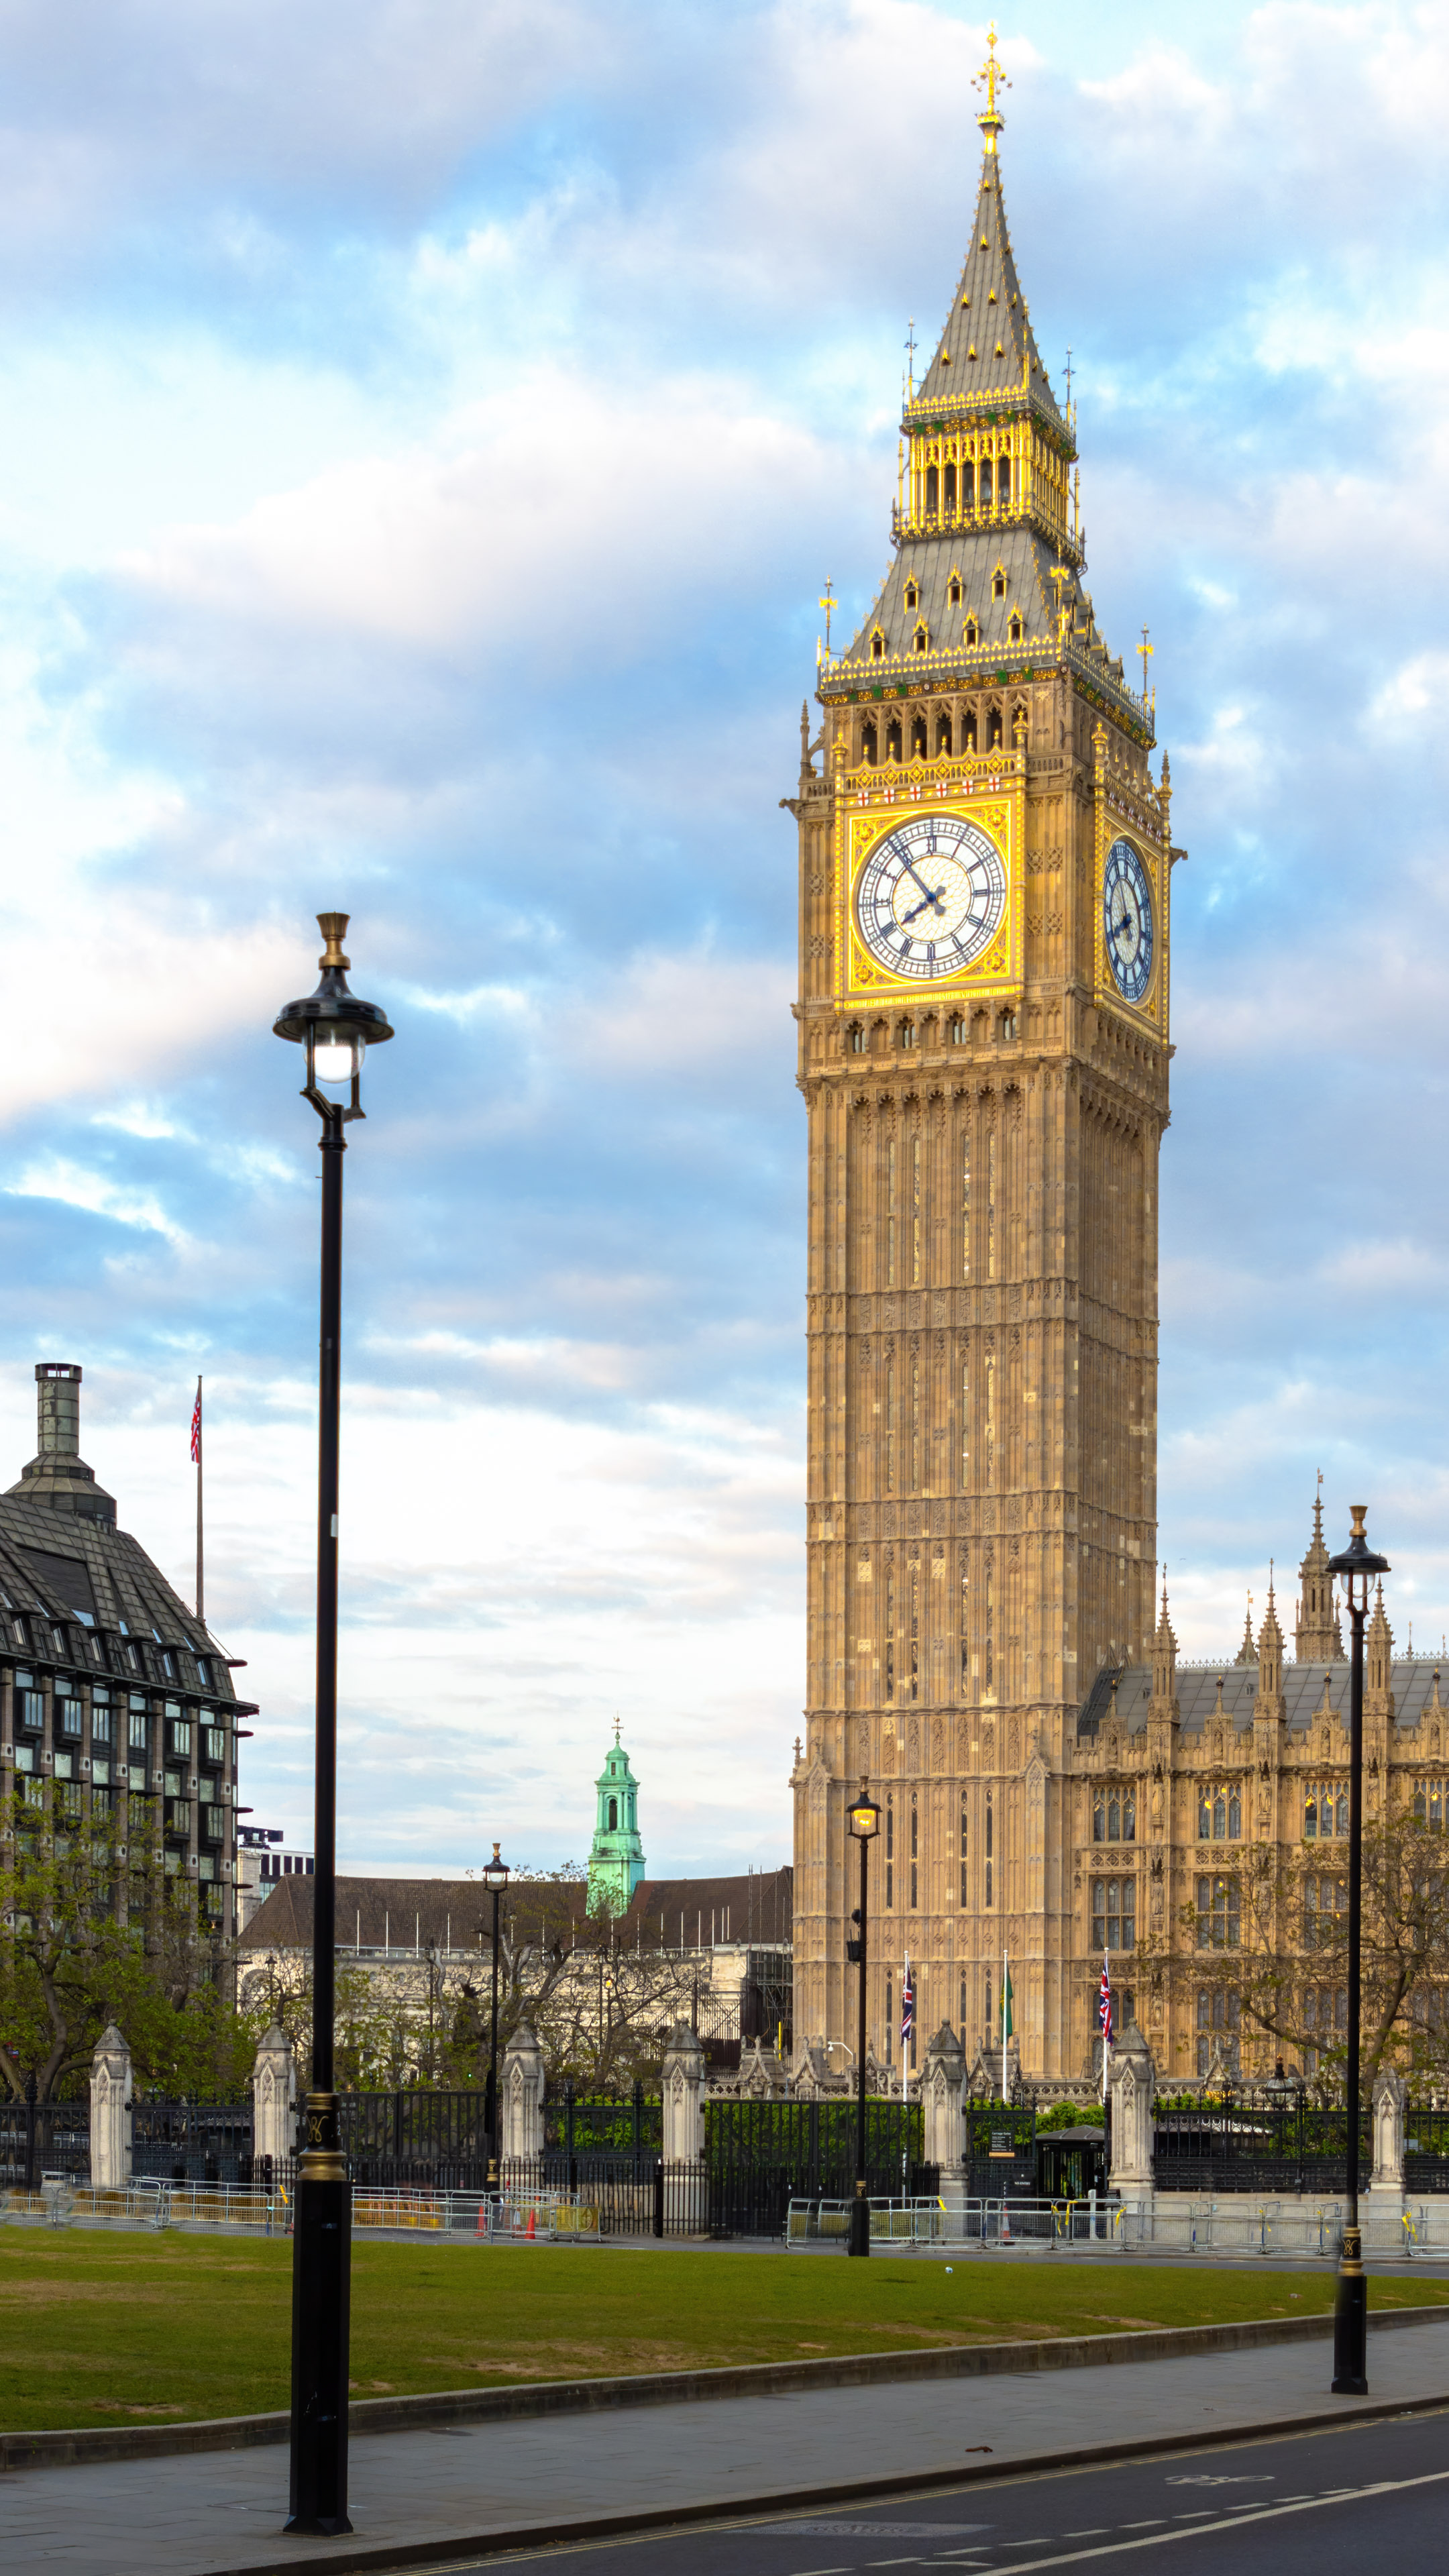 Get inspired by the iconic Big Ben with this London cityscape wallpaper for phone.